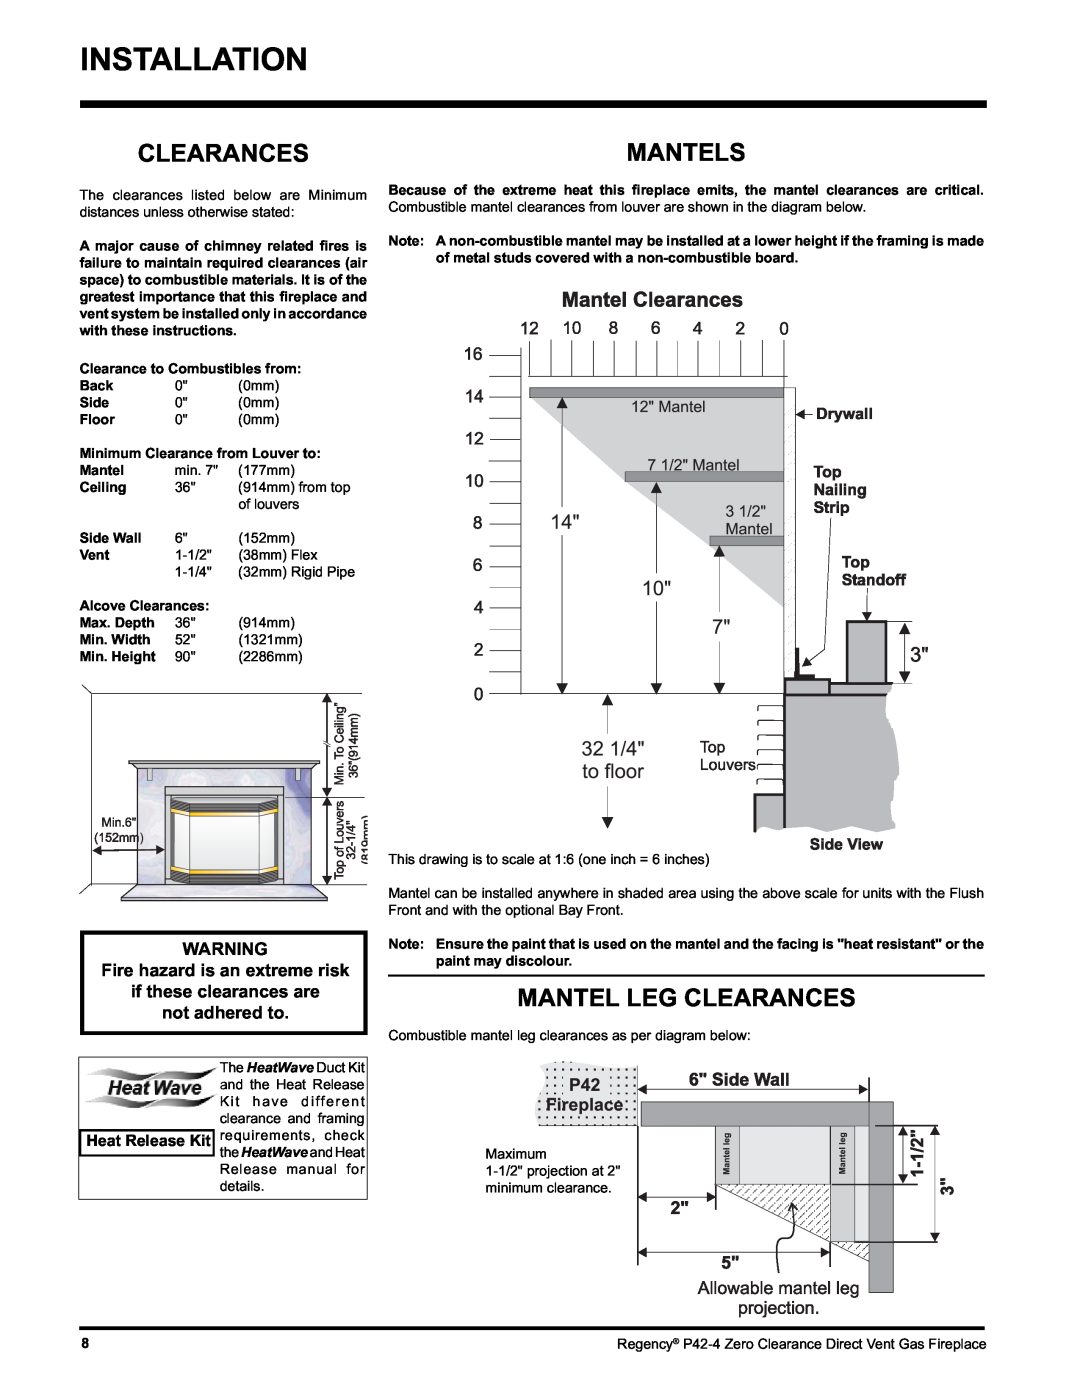 Regency P42-NG4 Clearancesmantels, Mantel Leg Clearances, Clearance to Combustibles from, Minimum Clearance from Louver to 